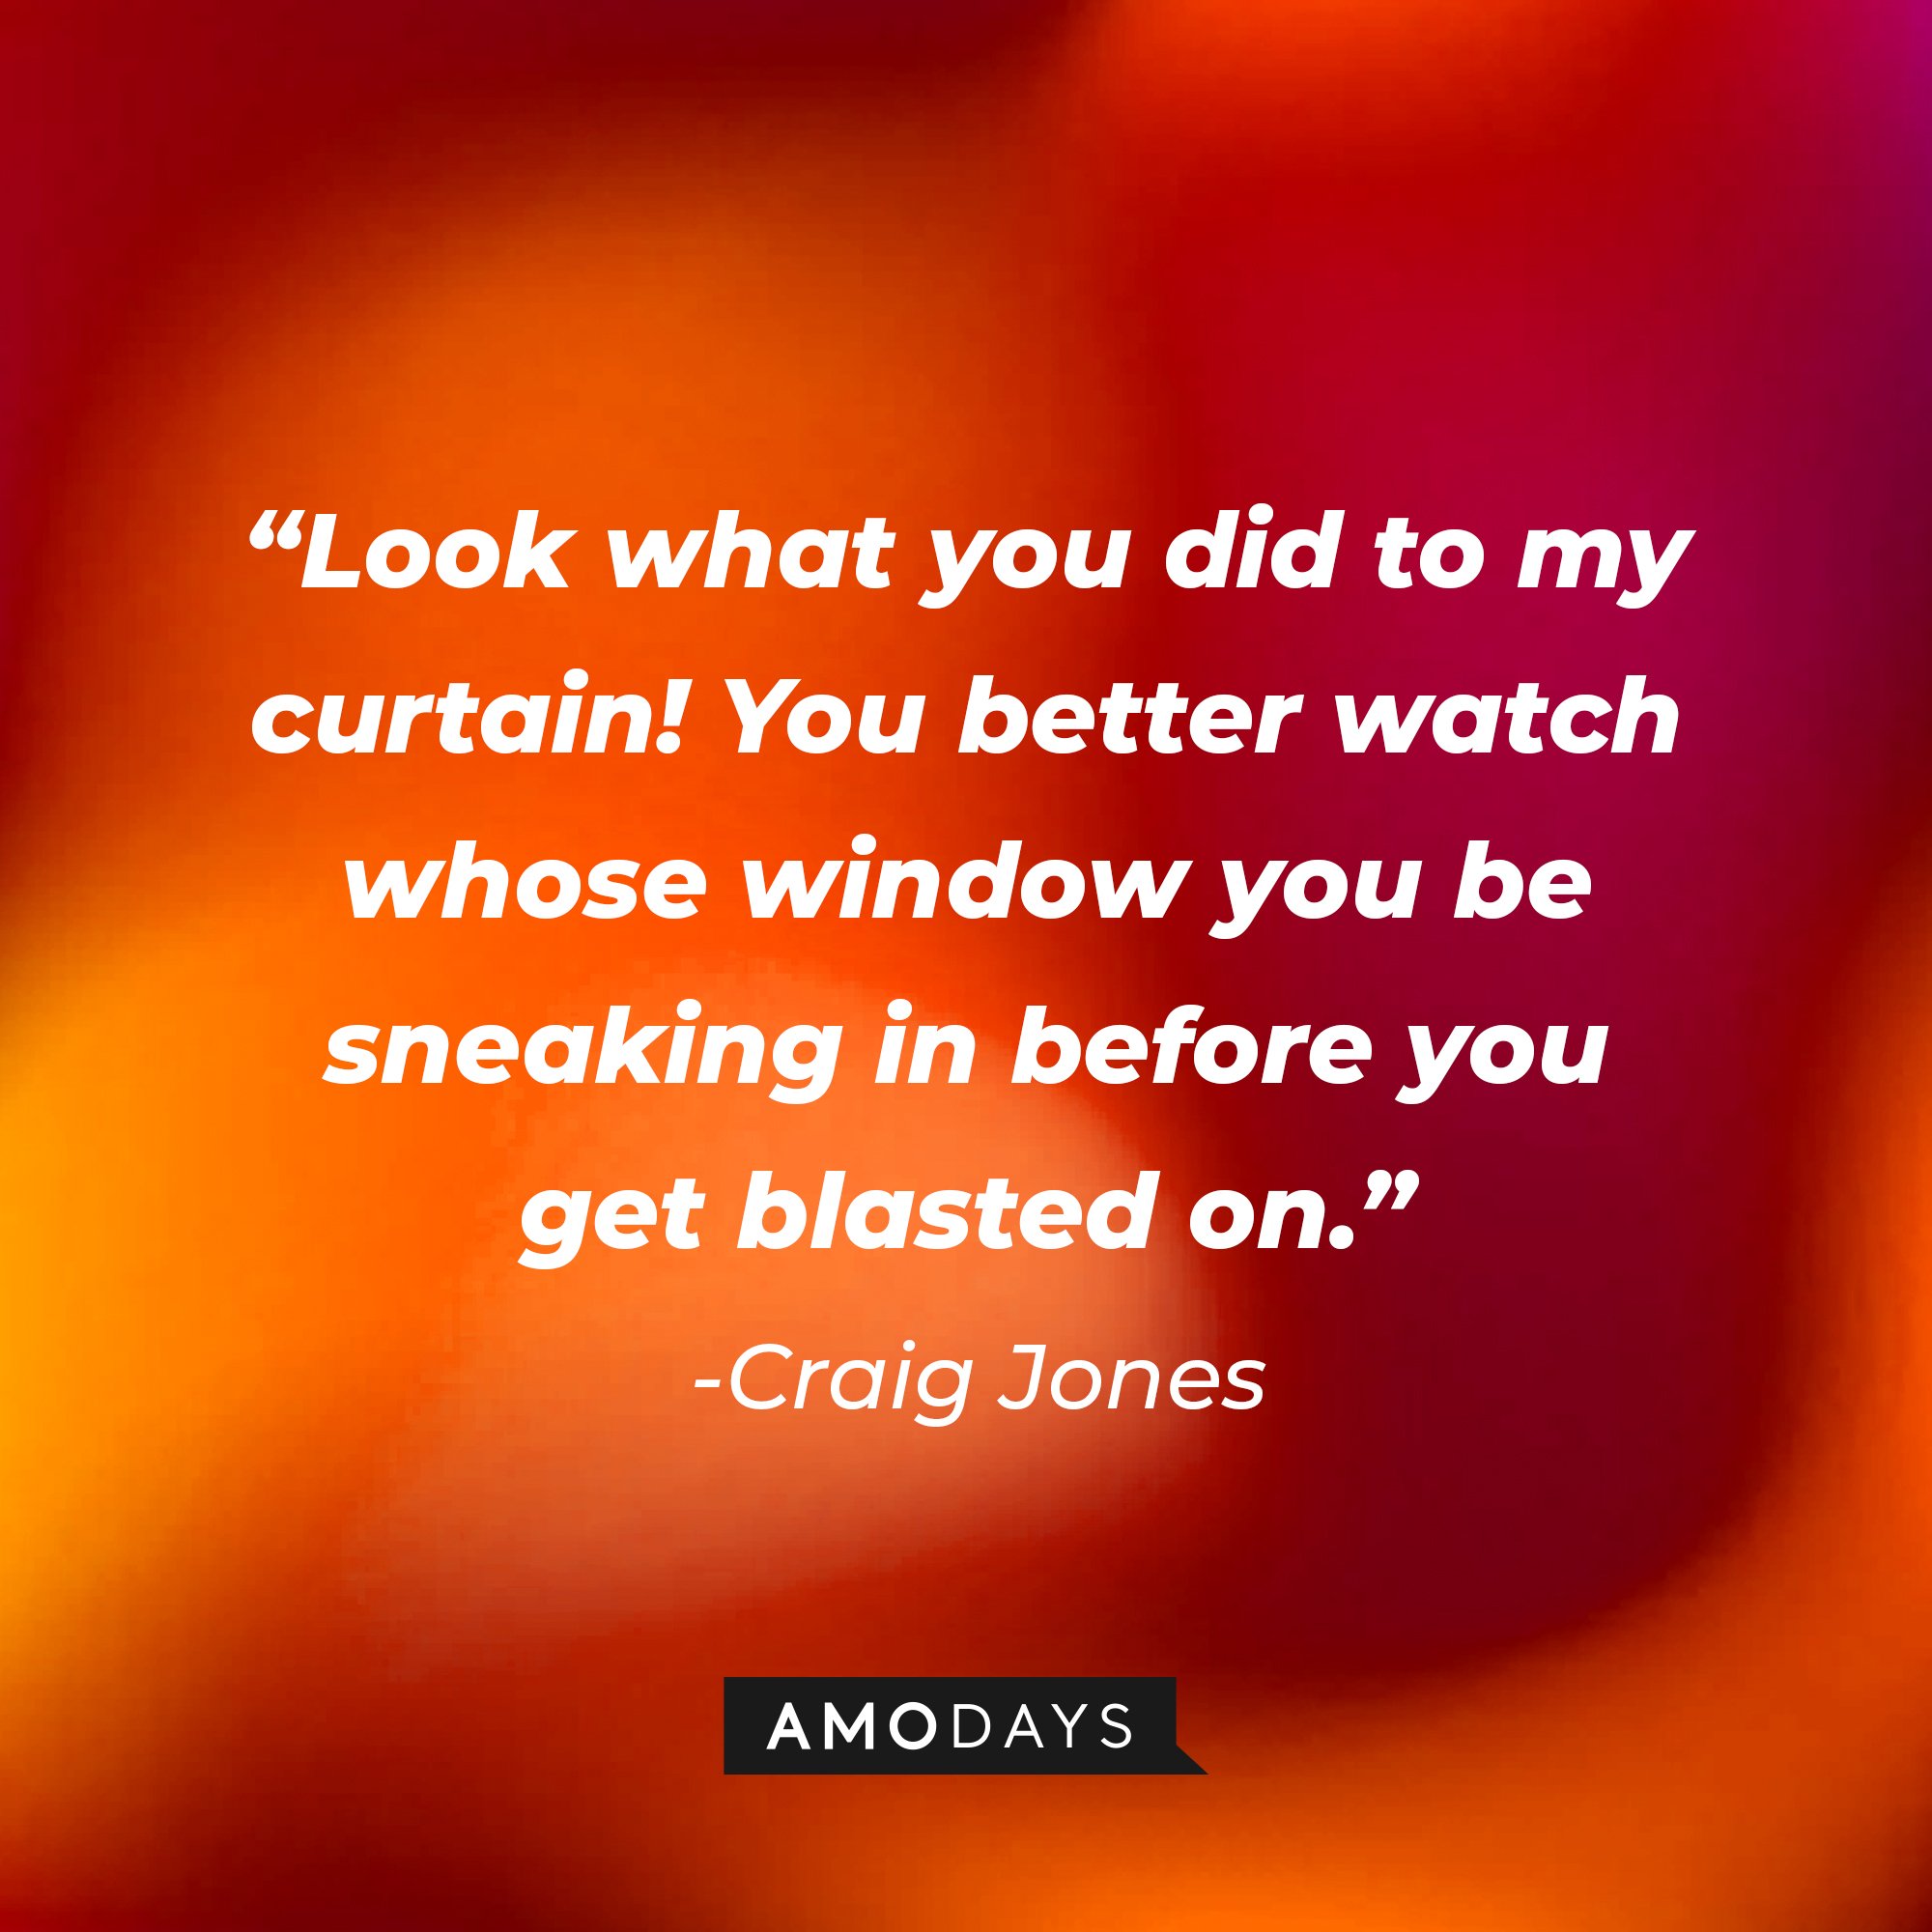  Craig Jones’ quote: "Look what you did to my curtain! You better watch whose window you be sneaking in before you get blasted on." | Image: AmoDays